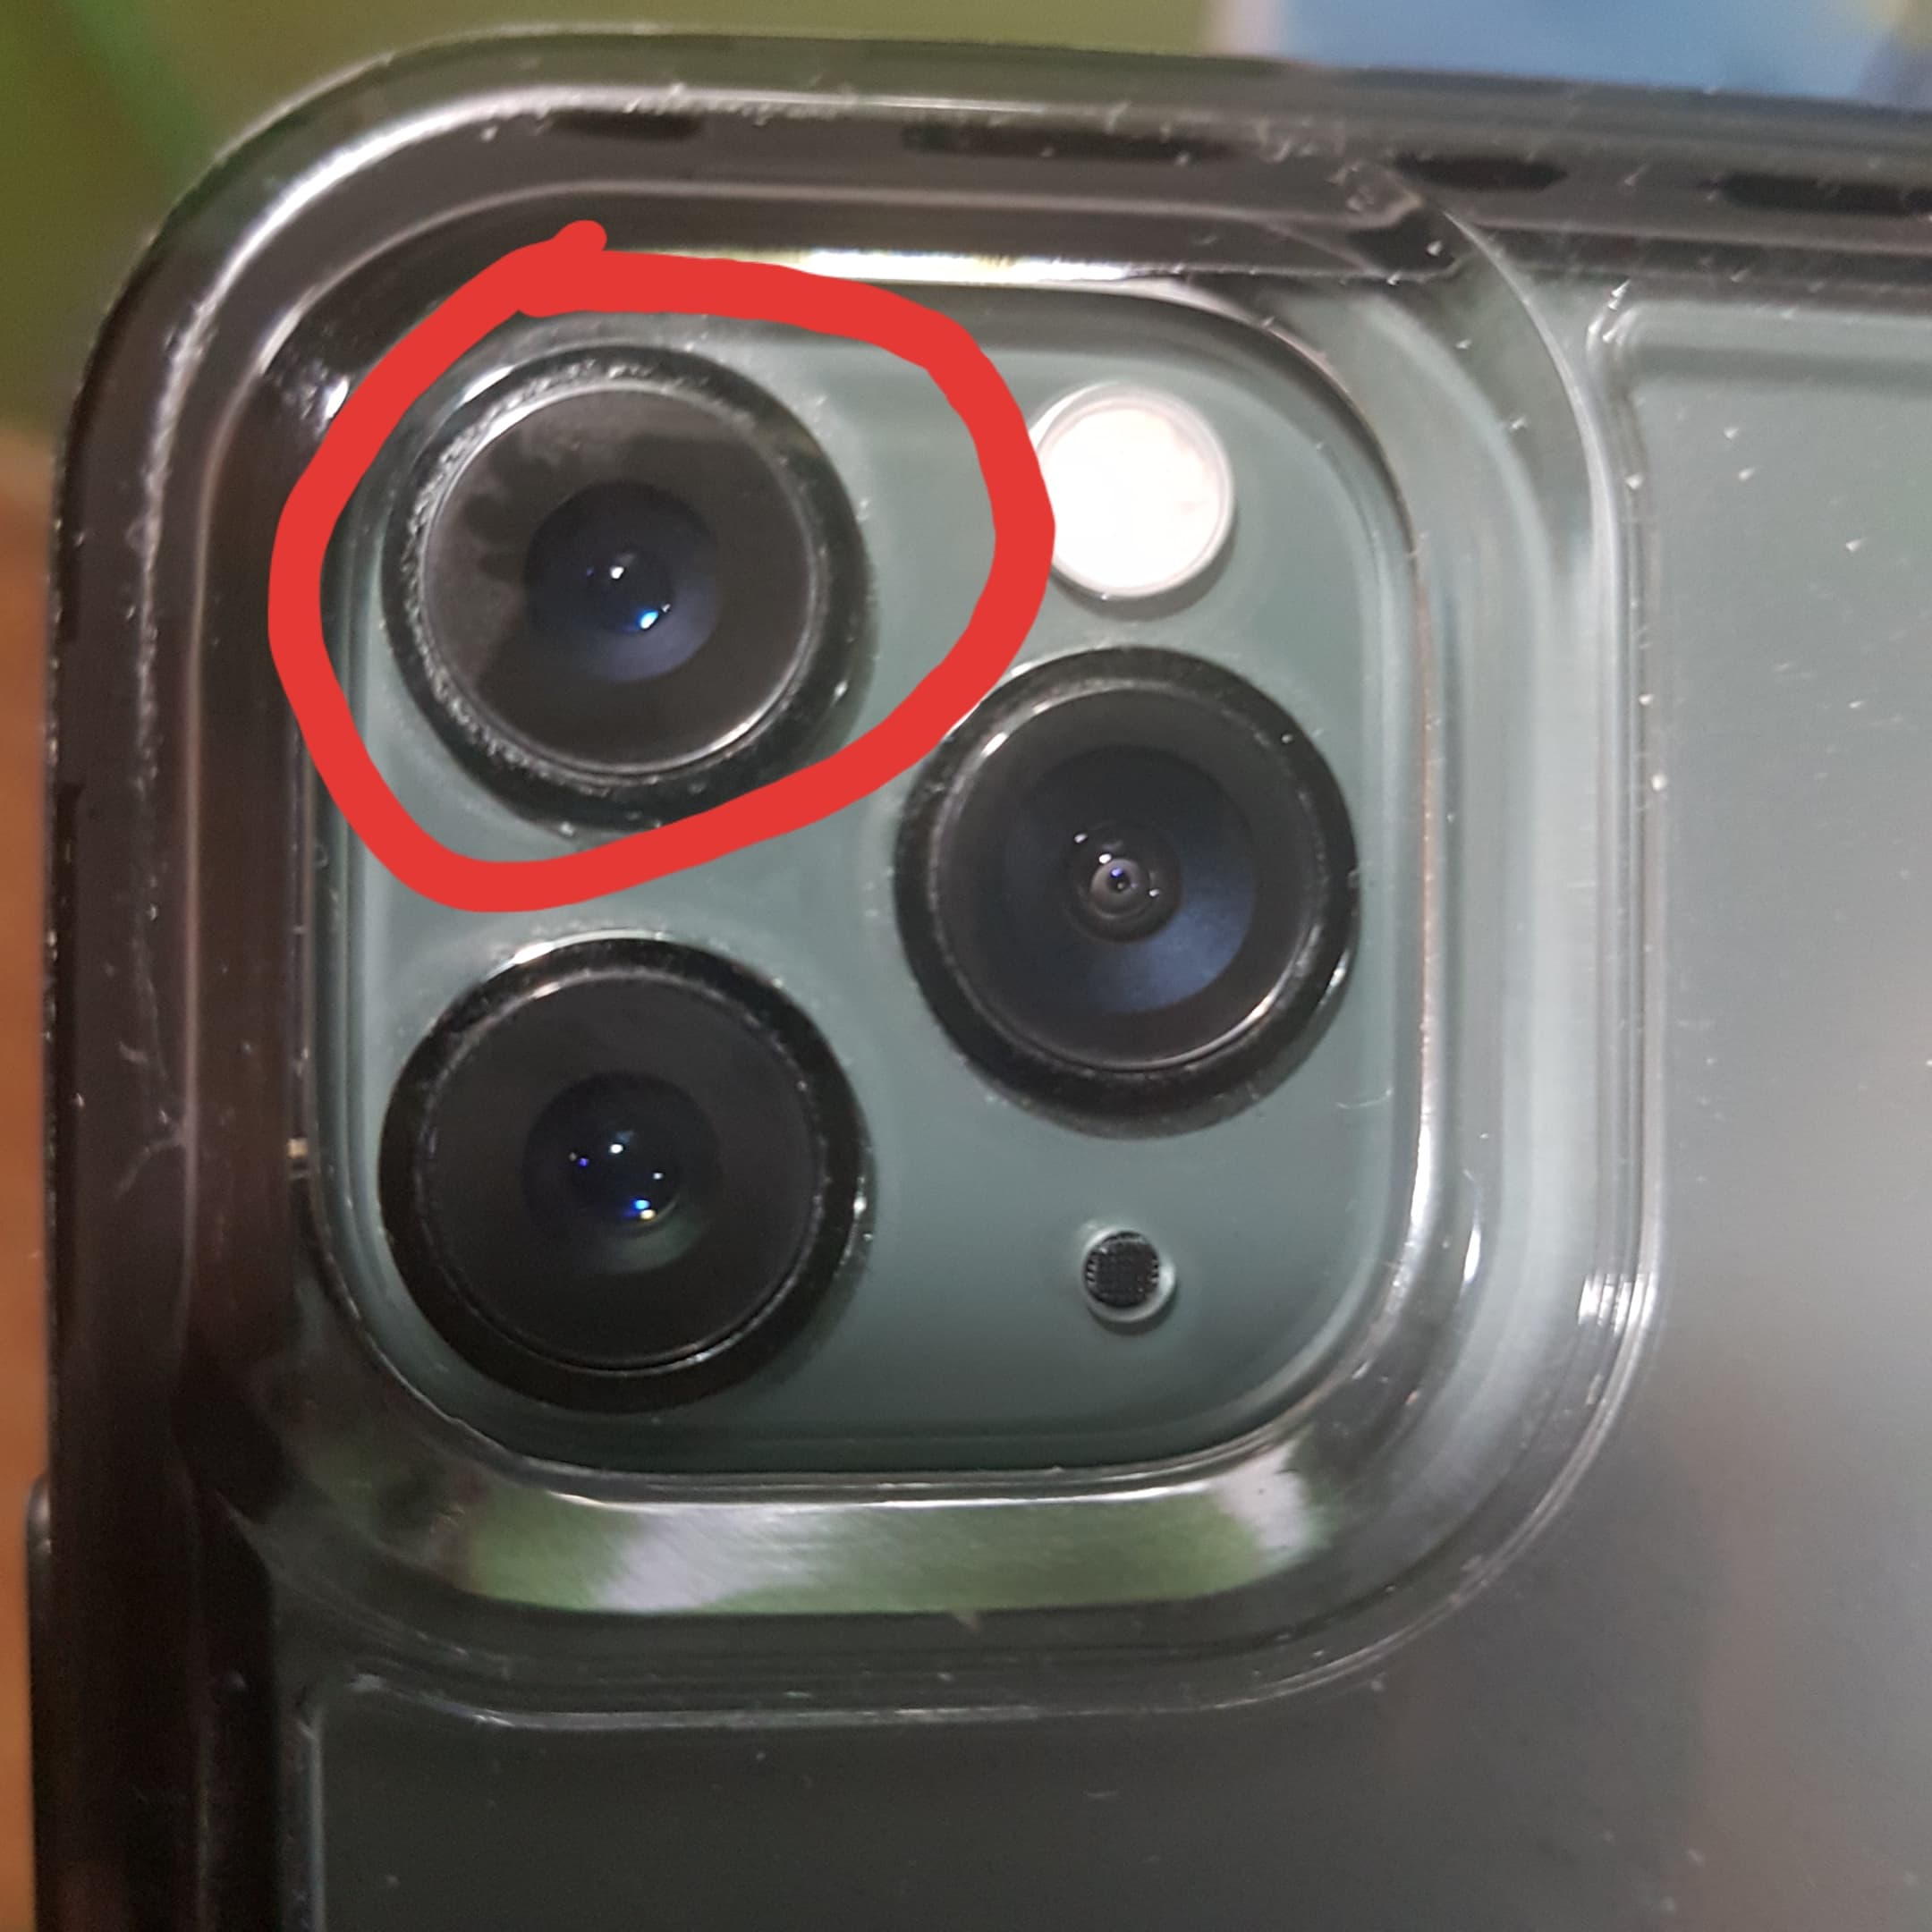 Are iPhone camera lenses scratch proof?